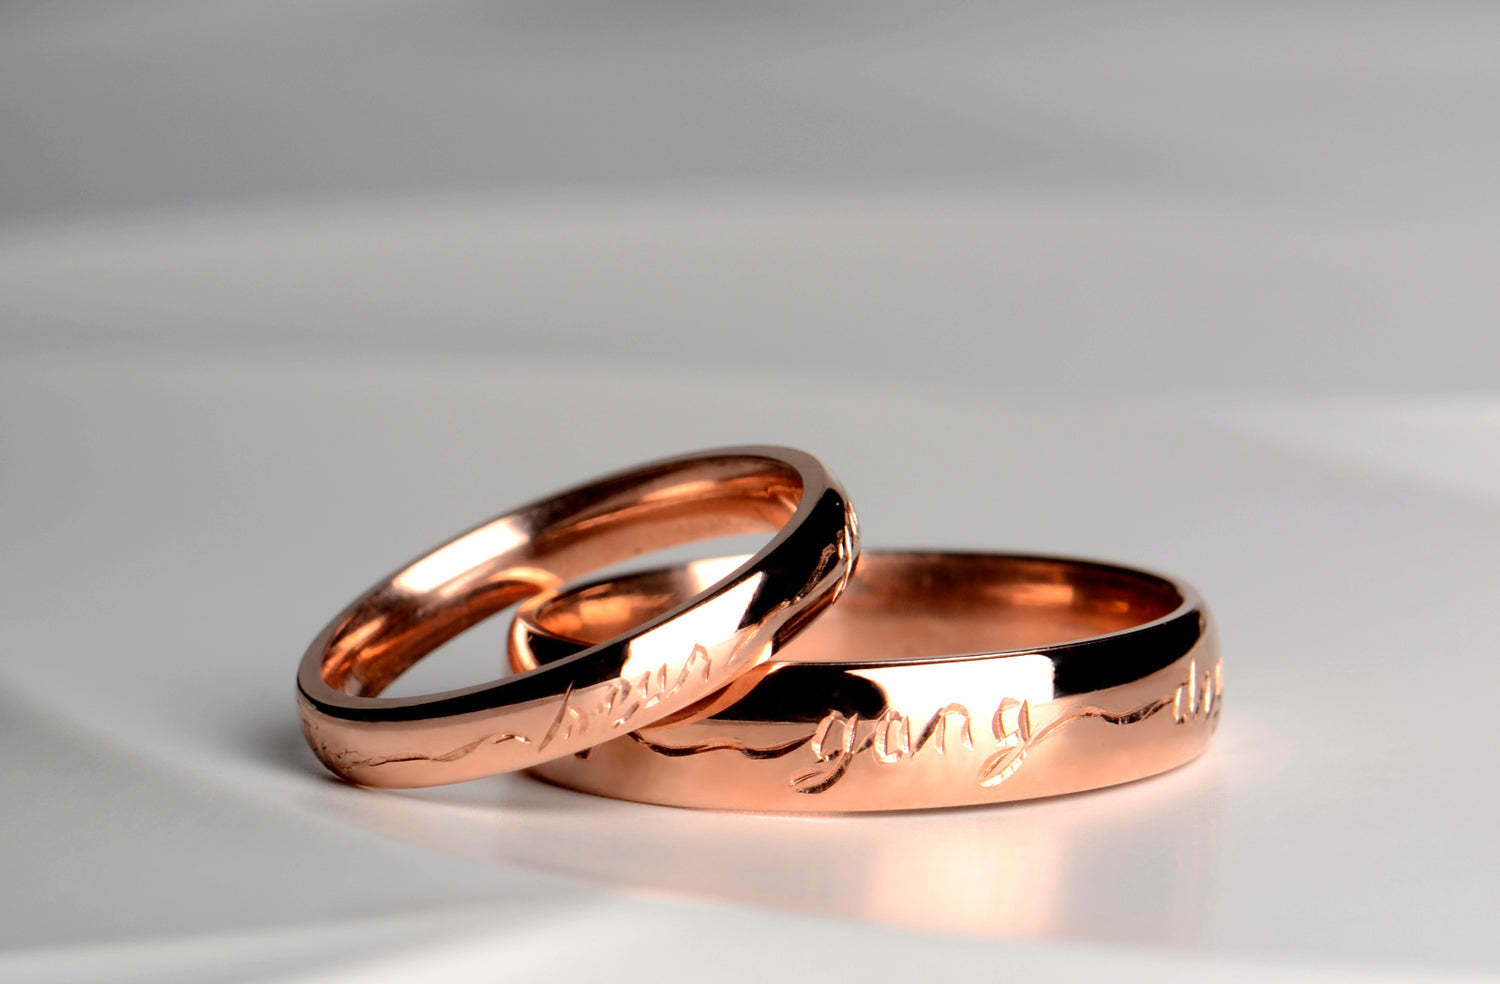 Personalised wedding rings handmade in the UK by british jewellery designer Christine Sadler. The photograph shows a matching pair of his and hers wedding rings in rose gold hand engraved with a scottish poetry phrase by Robert Burns.